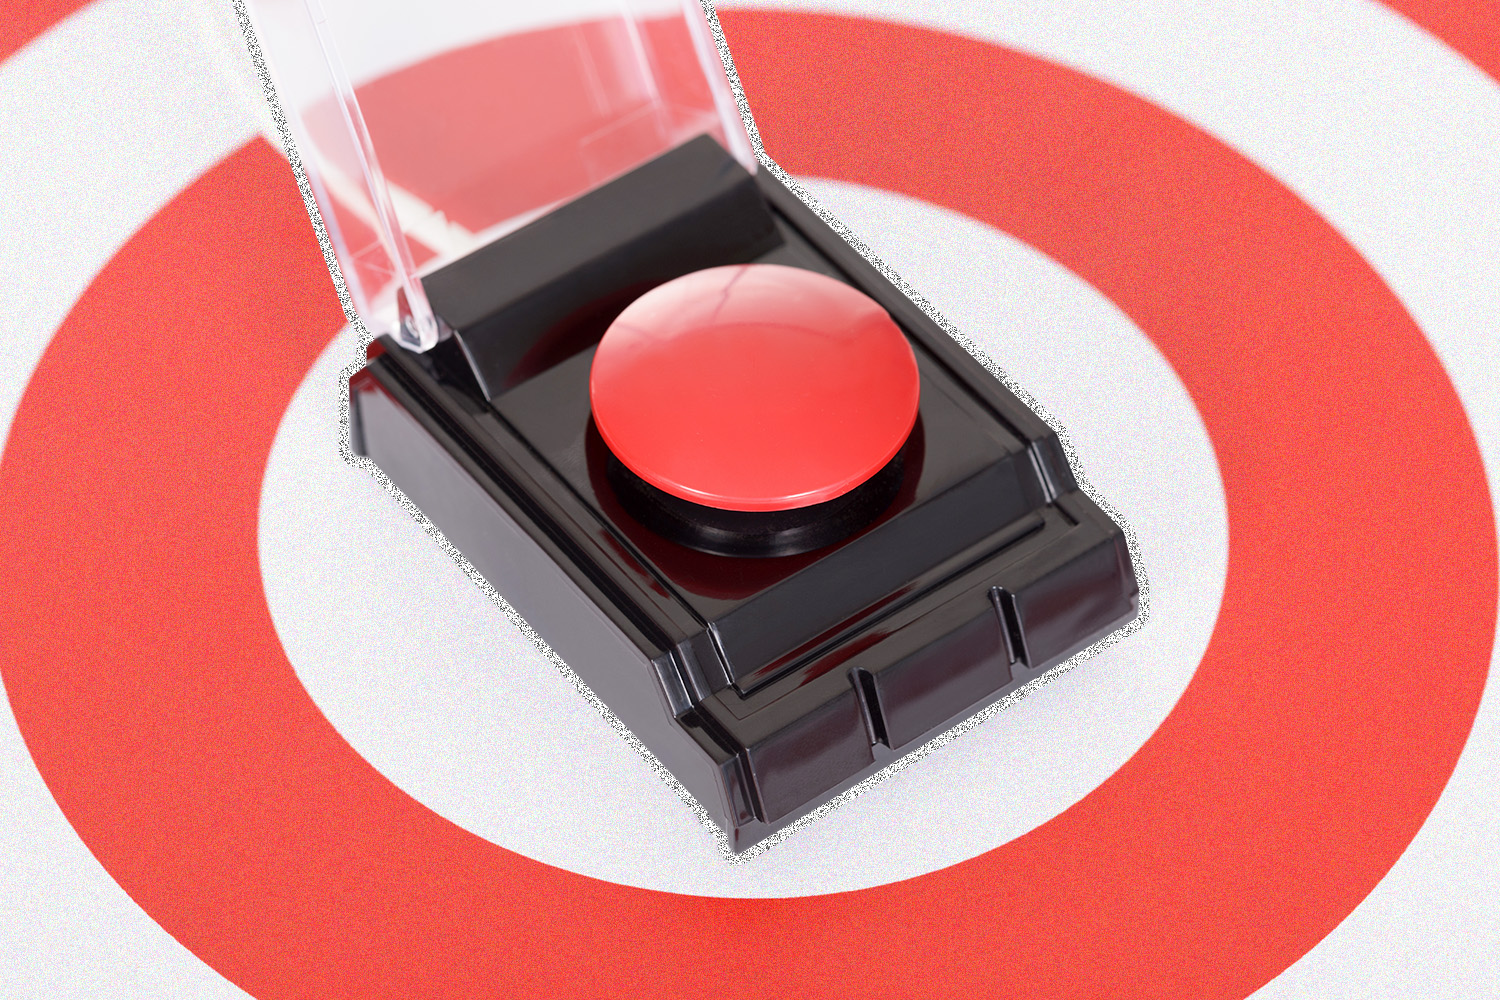 A red button sitting on a red and white target